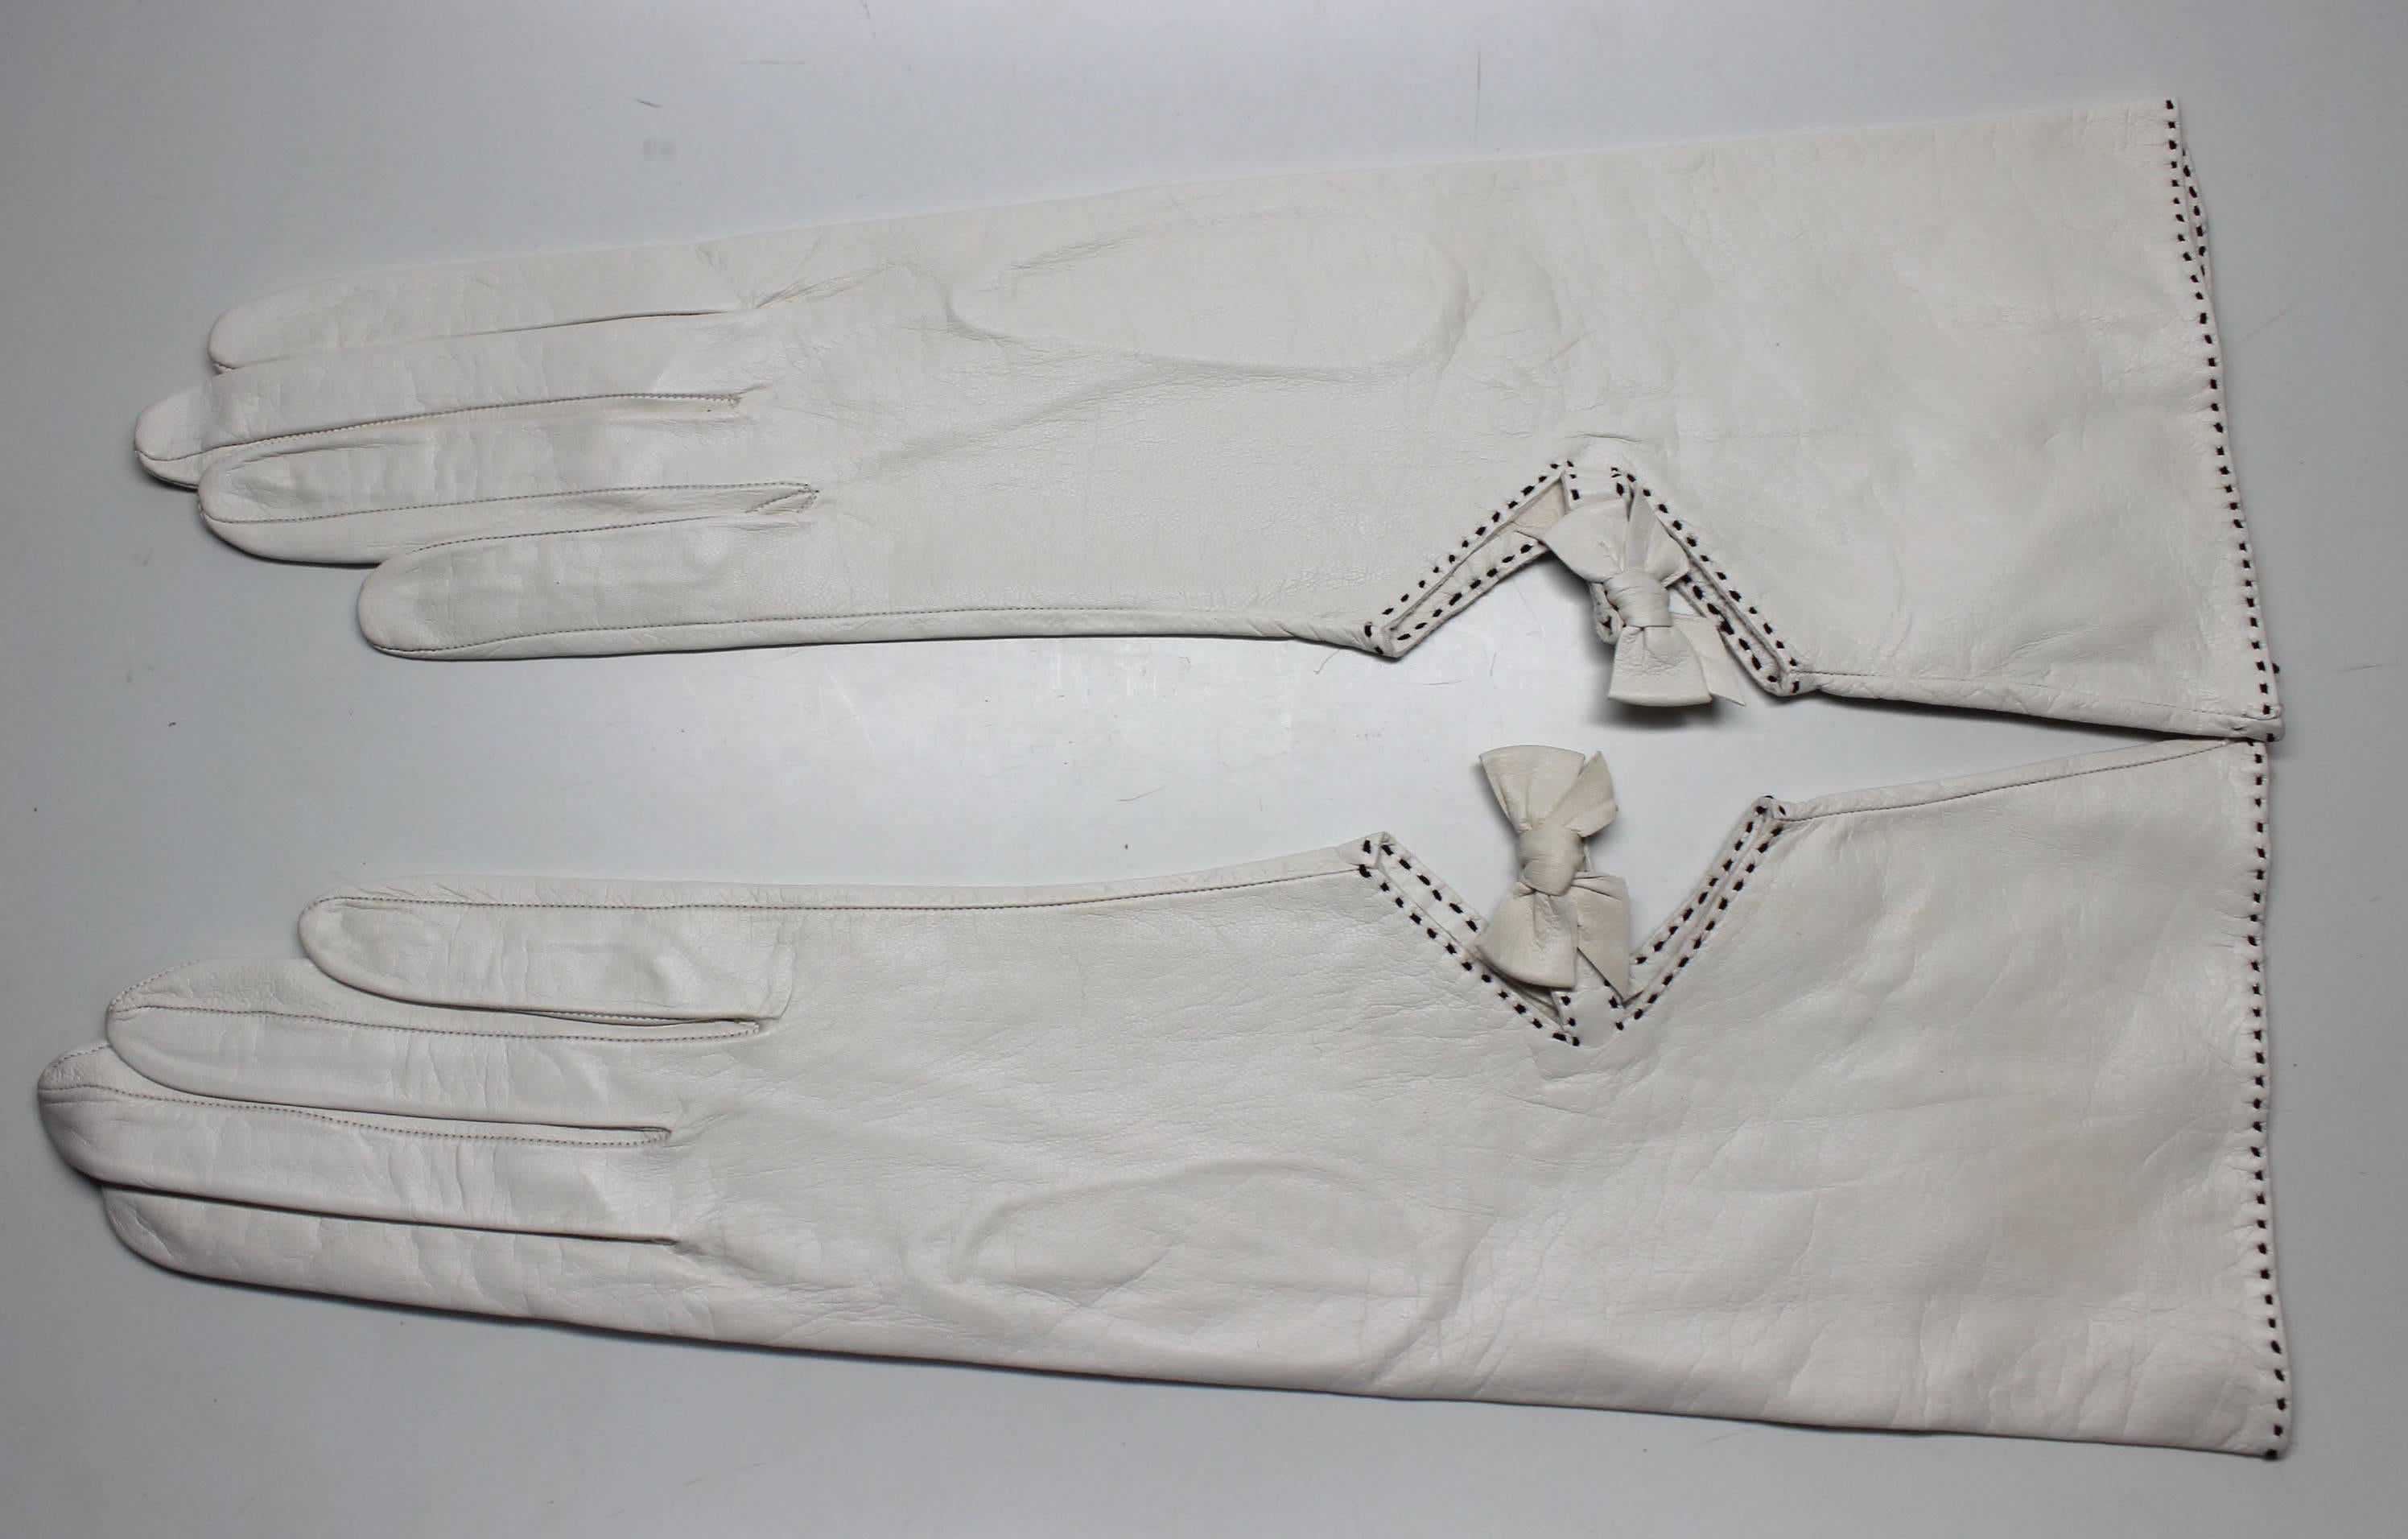 These French Roger Fare kidskin white gloves are soft & elegant. They have black stitching detail along the wrist and bow detail cut out. Never worn.